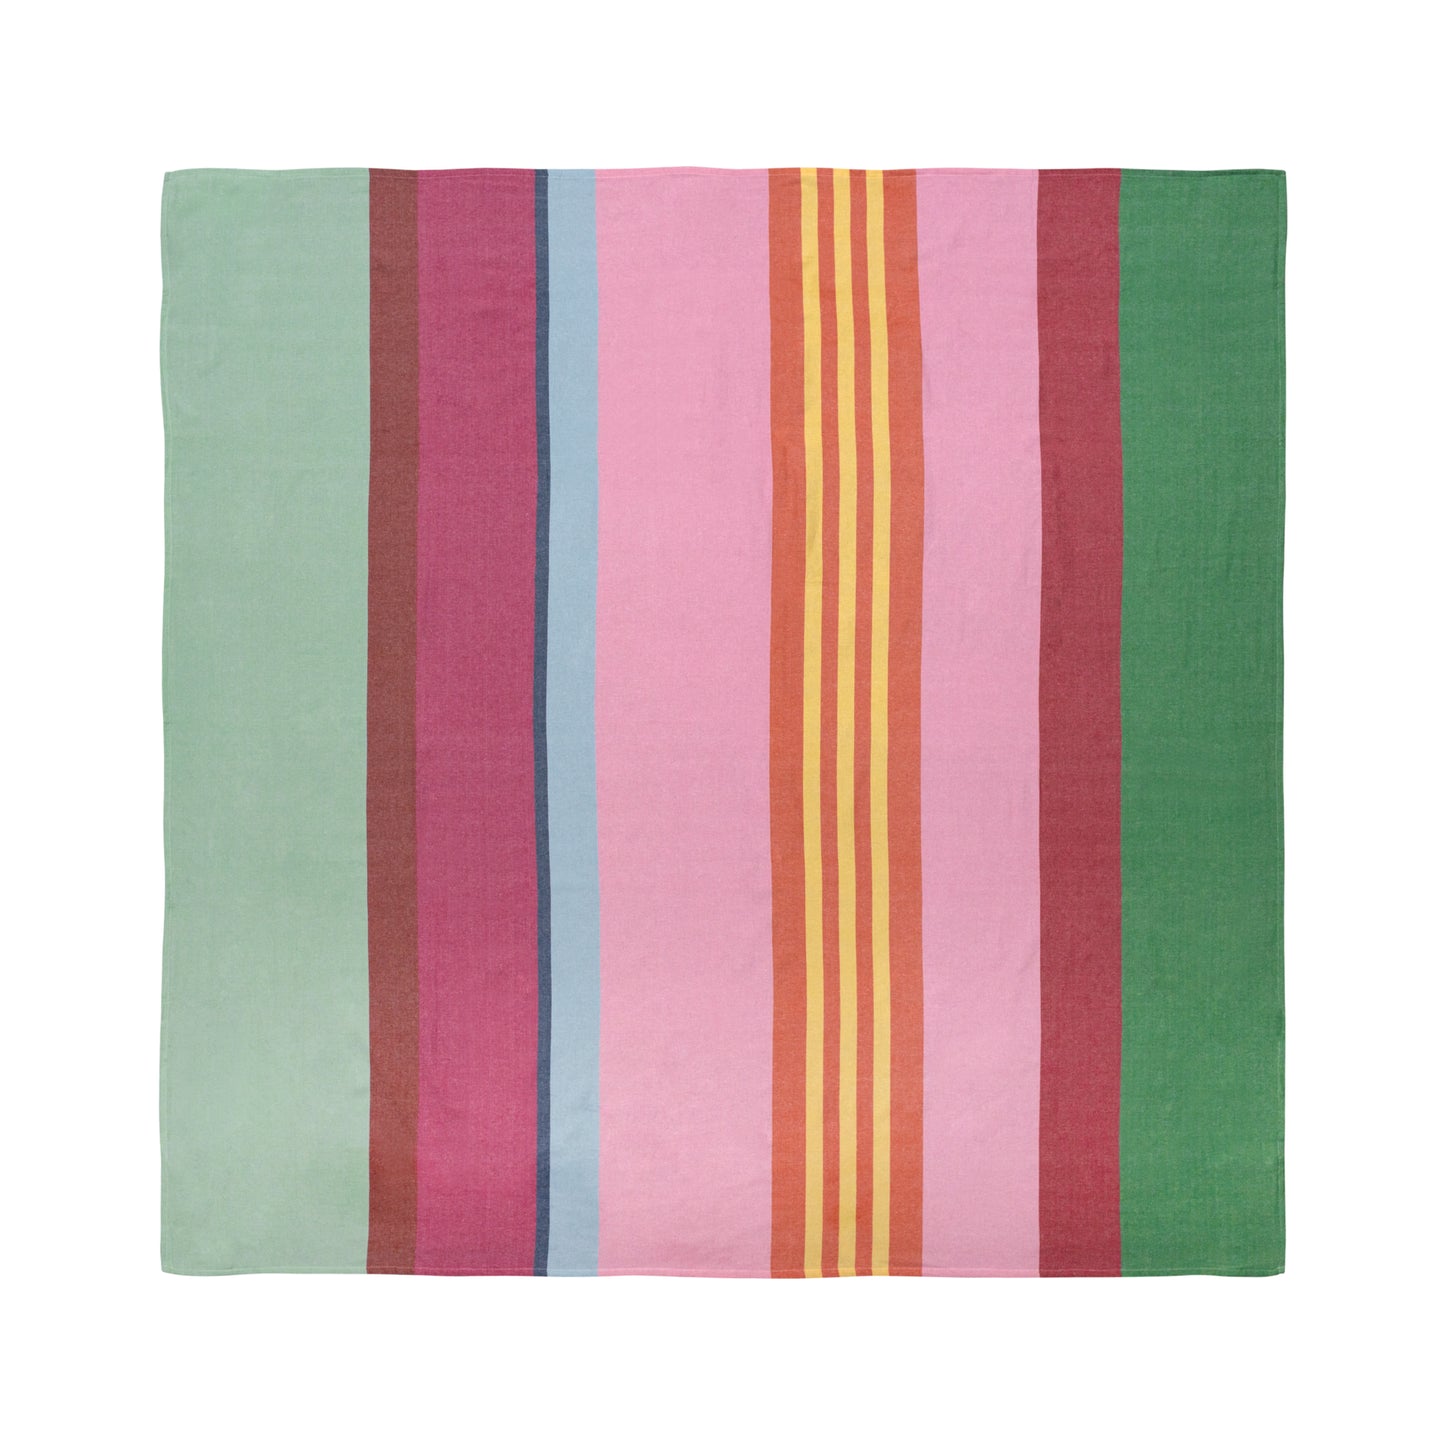 large striped beach blanket with green, pink, purple and yellow stripes